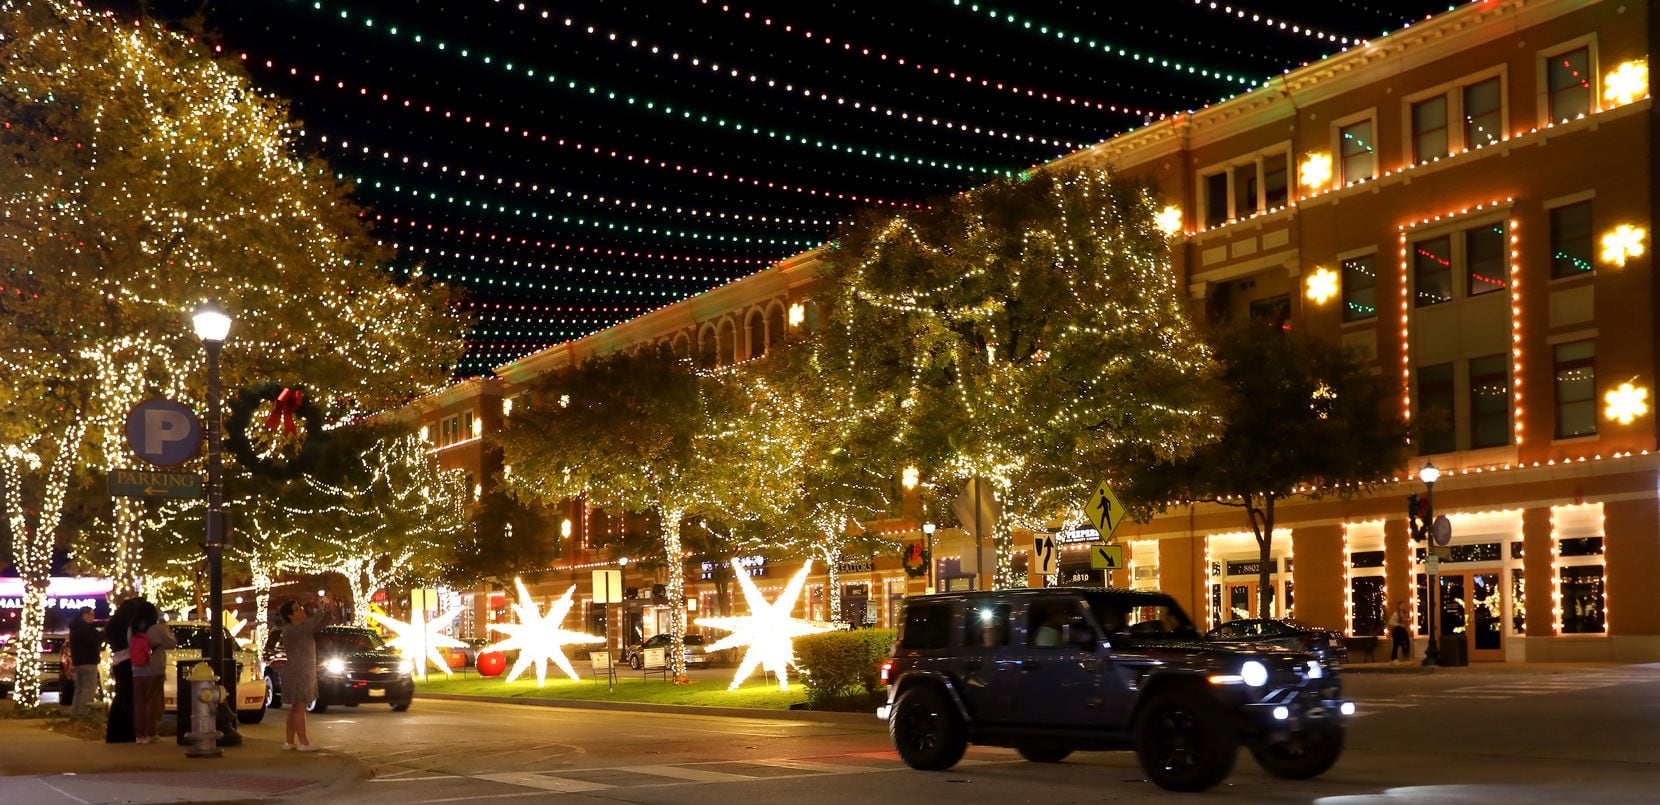 More than 180,000 lights blink to holiday music in Frisco's Christmas in the Square.